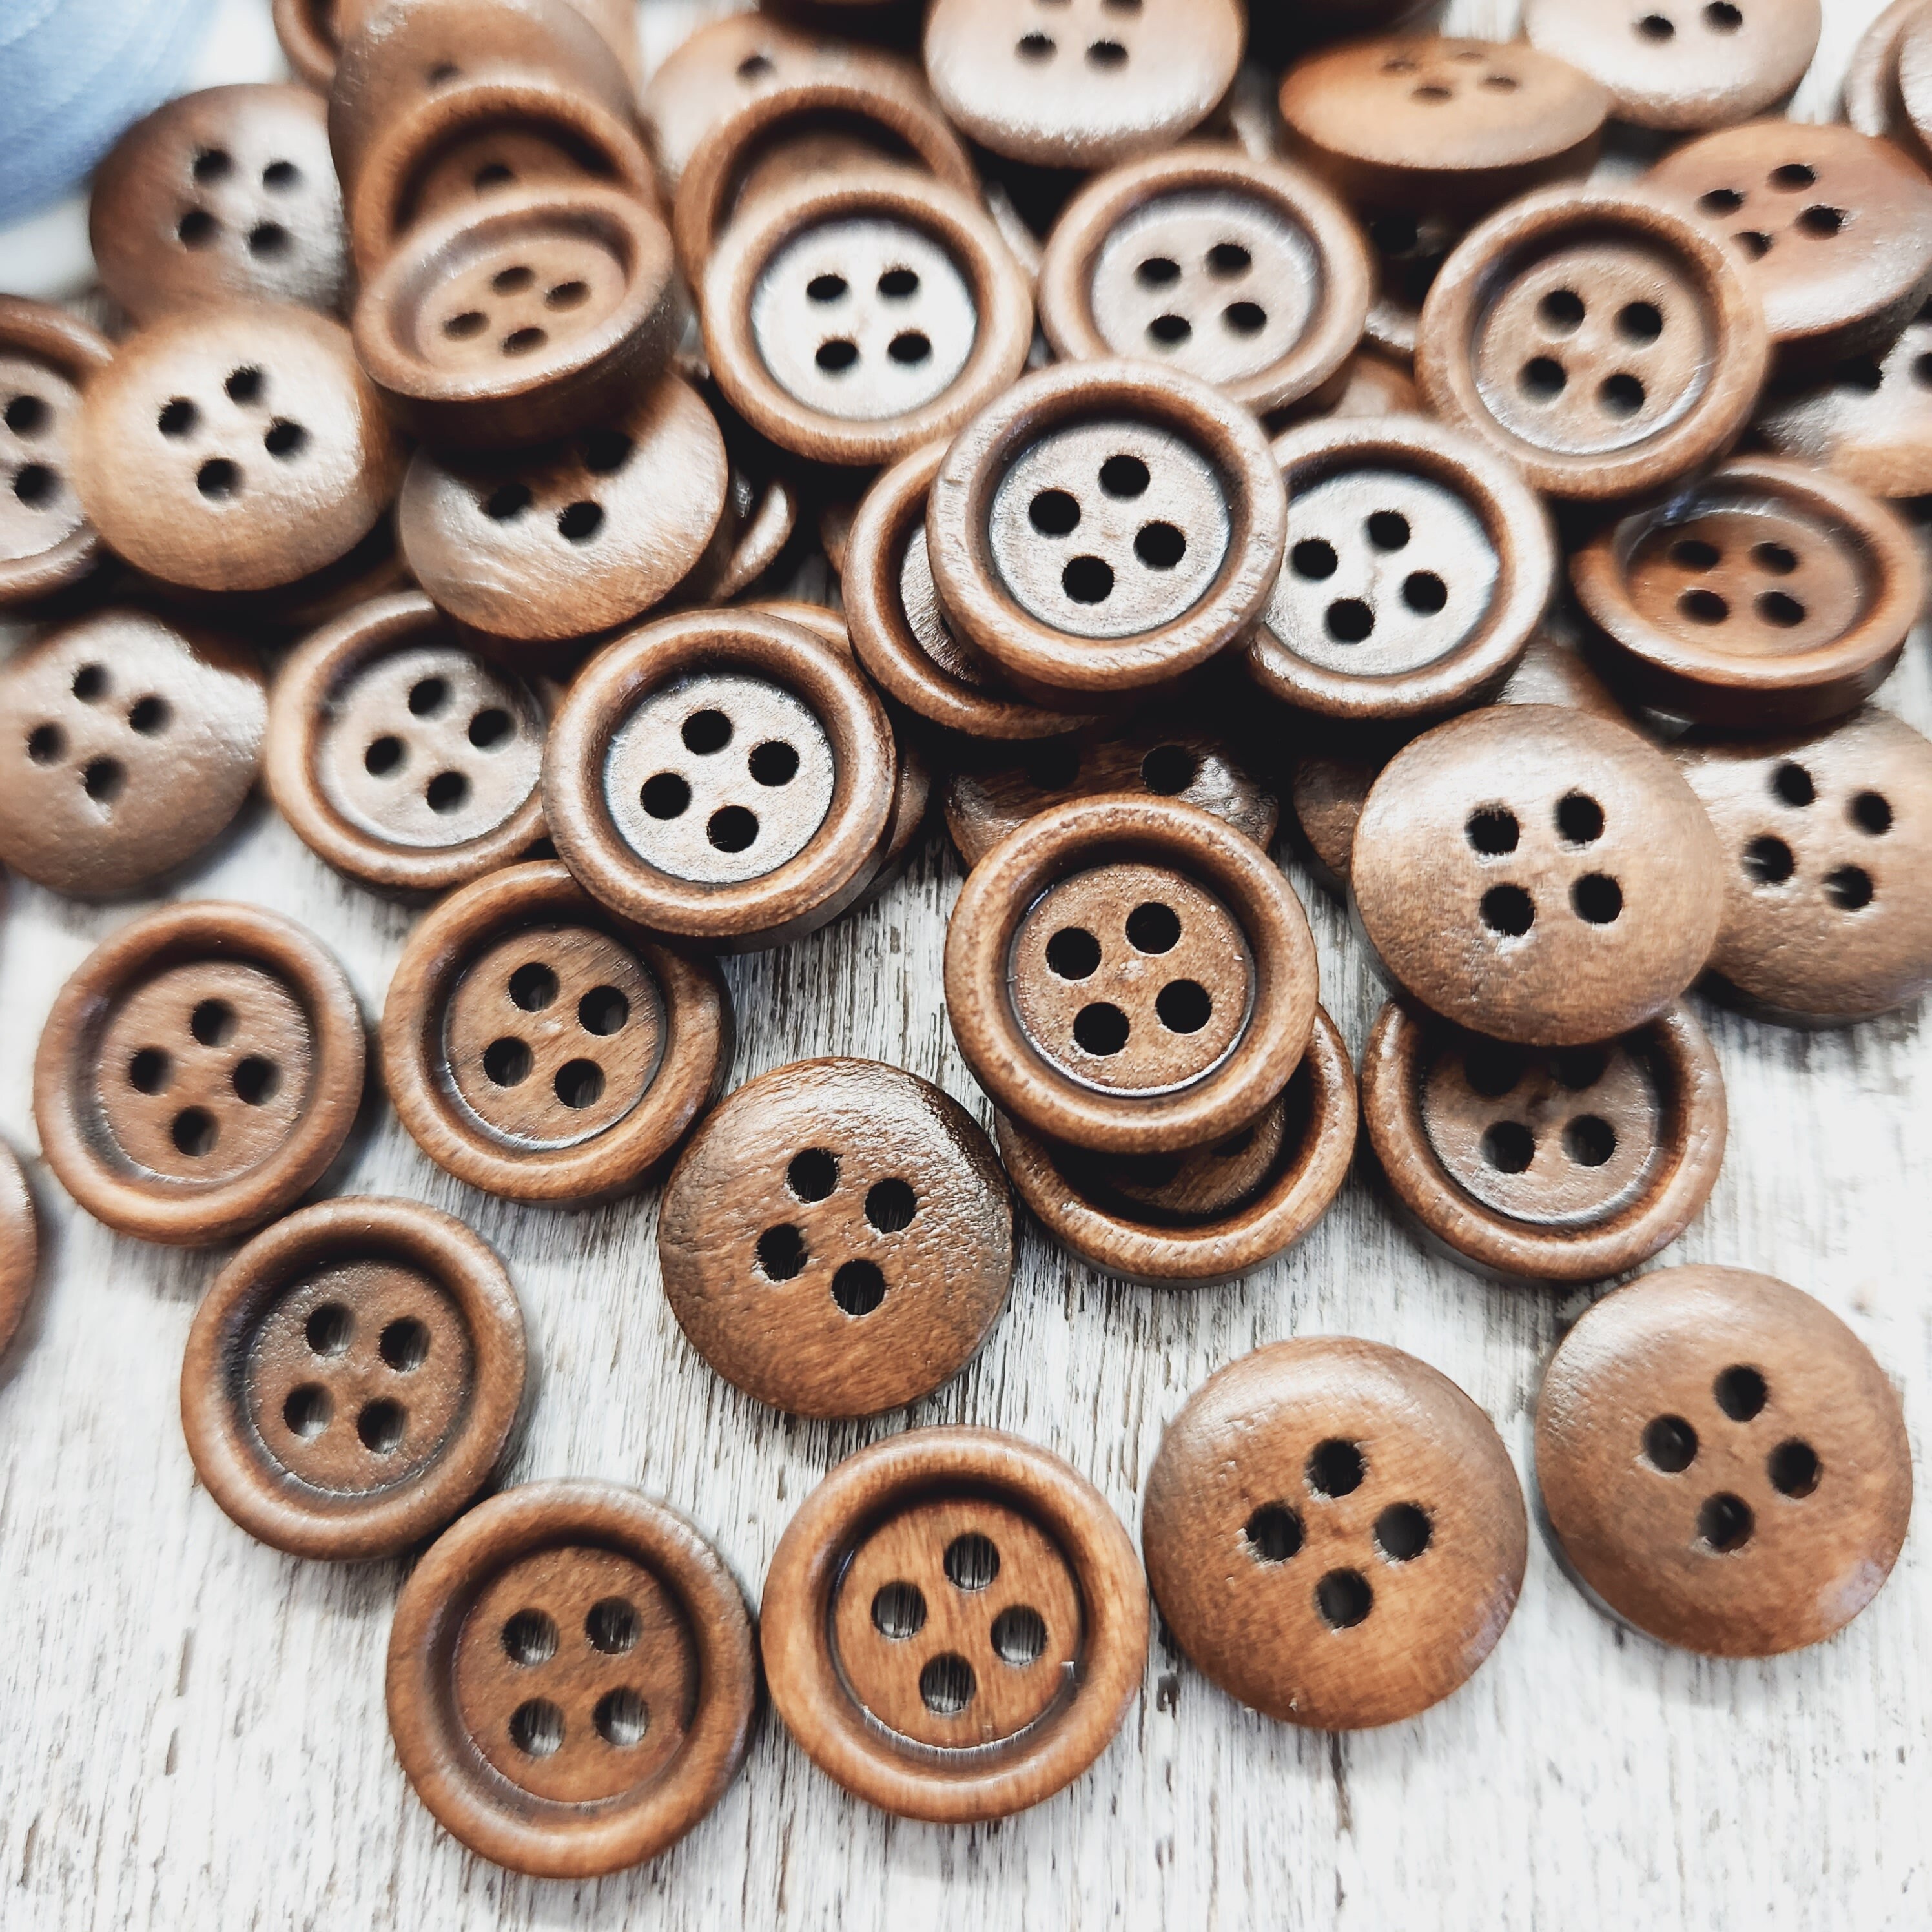 20 x Heart shaped Wooden Flat Buttons, 20mm Dyed, Sew Scrapbooking